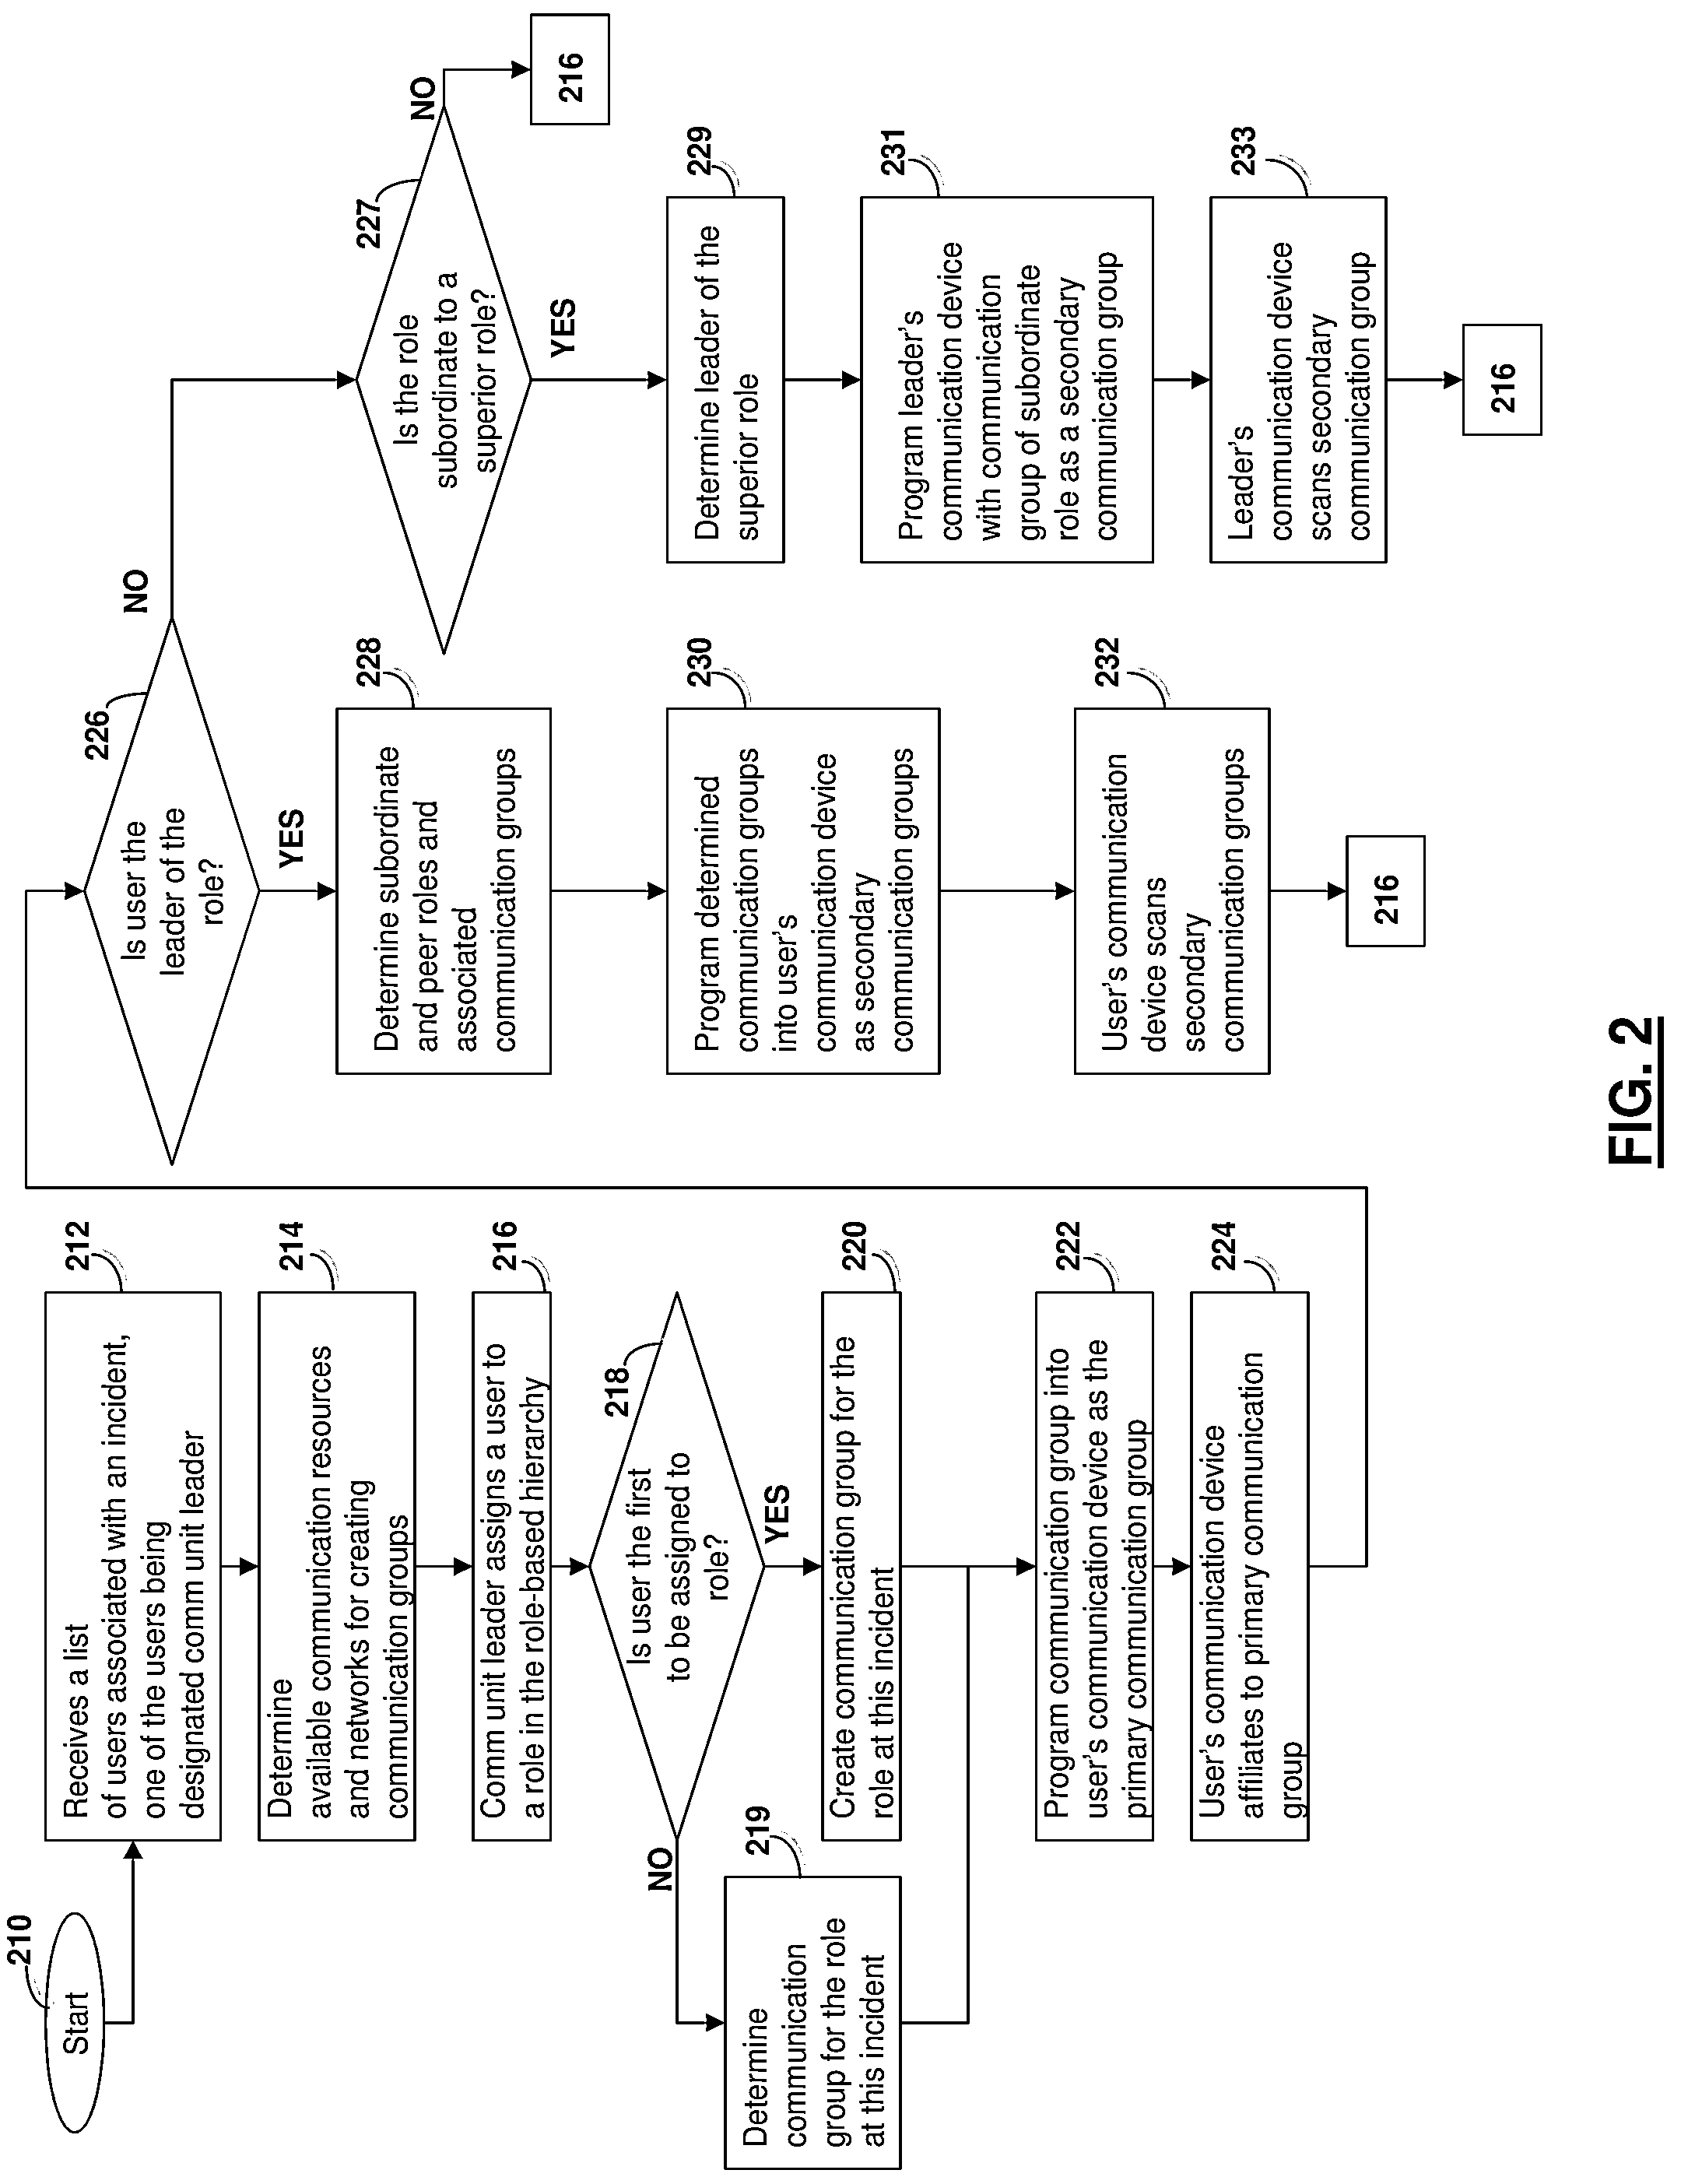 Programming secondary communication groups to devices arranged in a hierarchy of groups